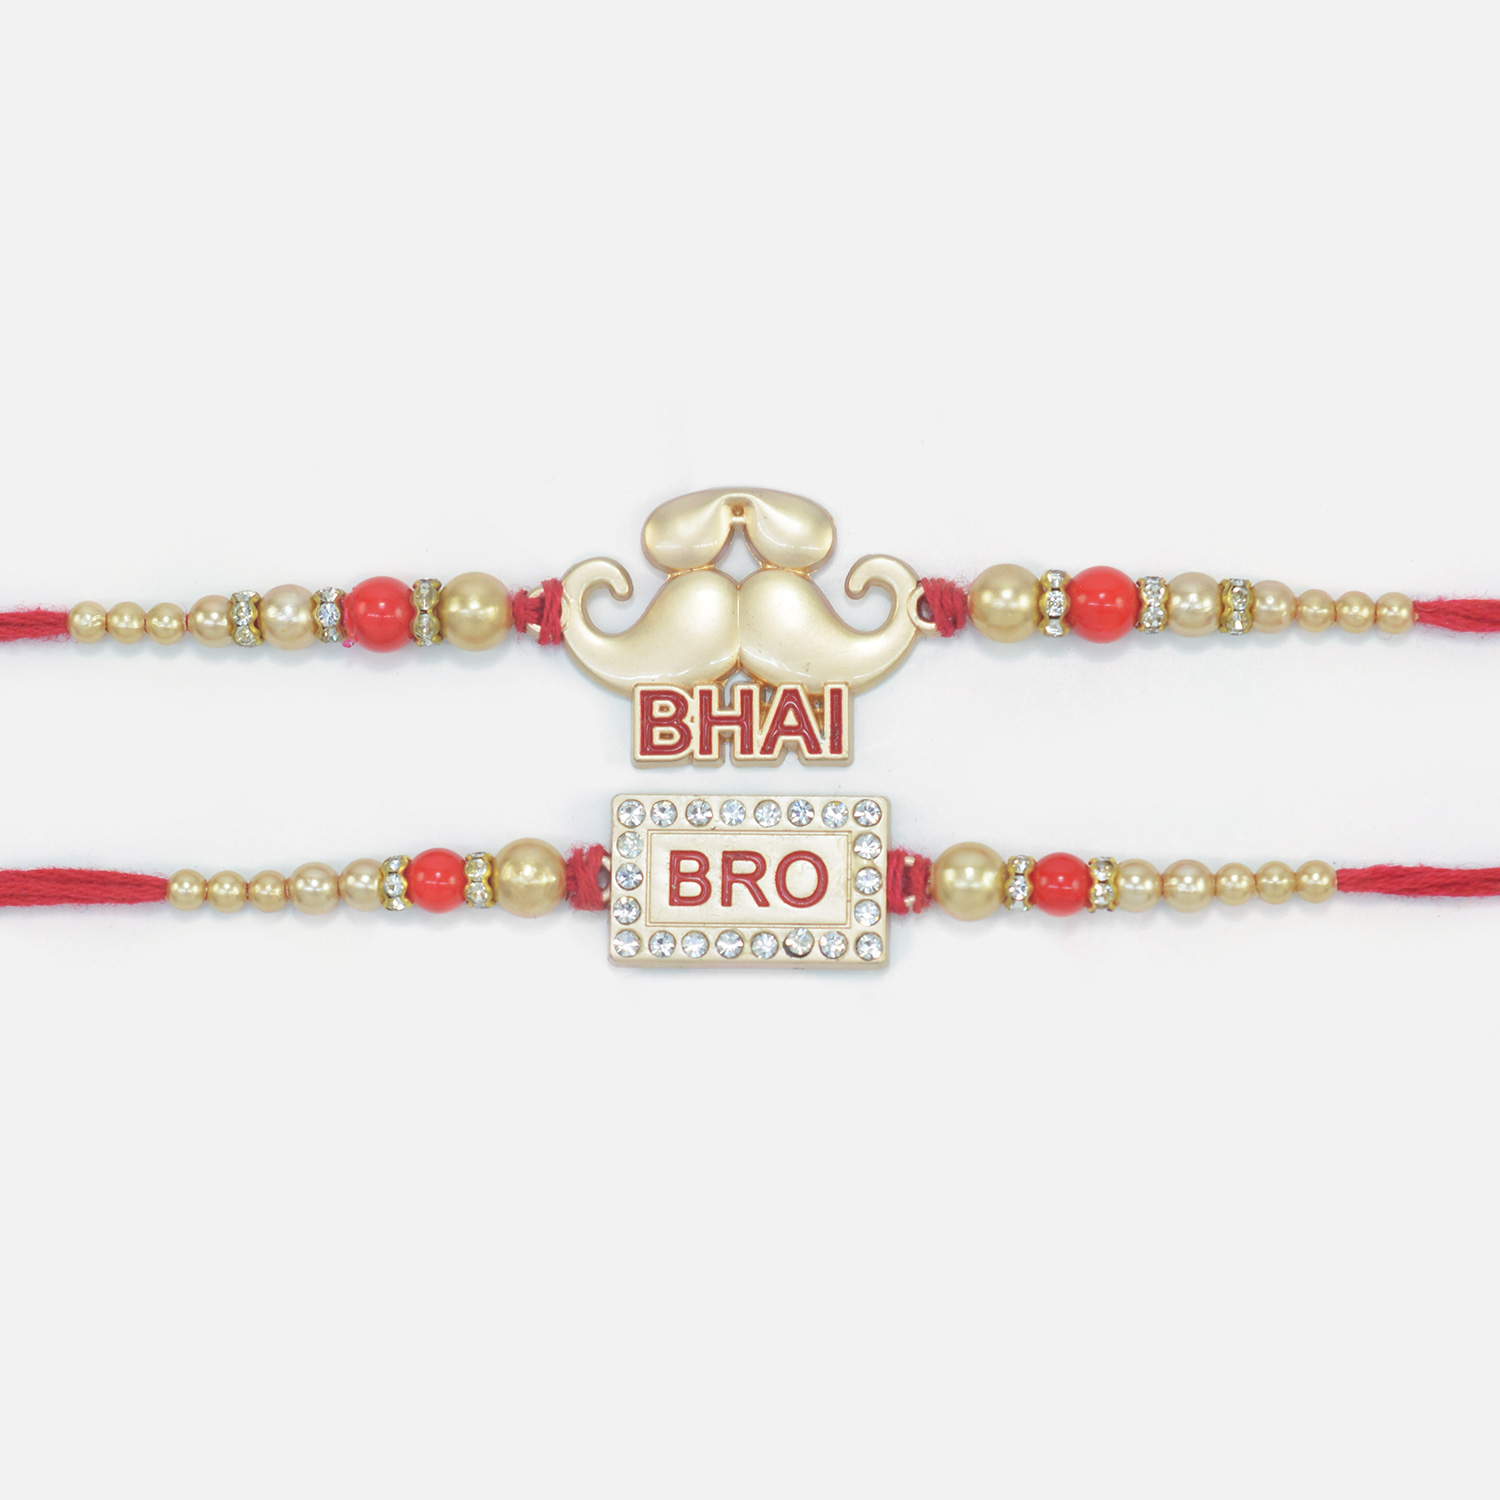 Mustache Bhai and Bro Written Creamy Pearl Type Beads Brother Rahis for 2